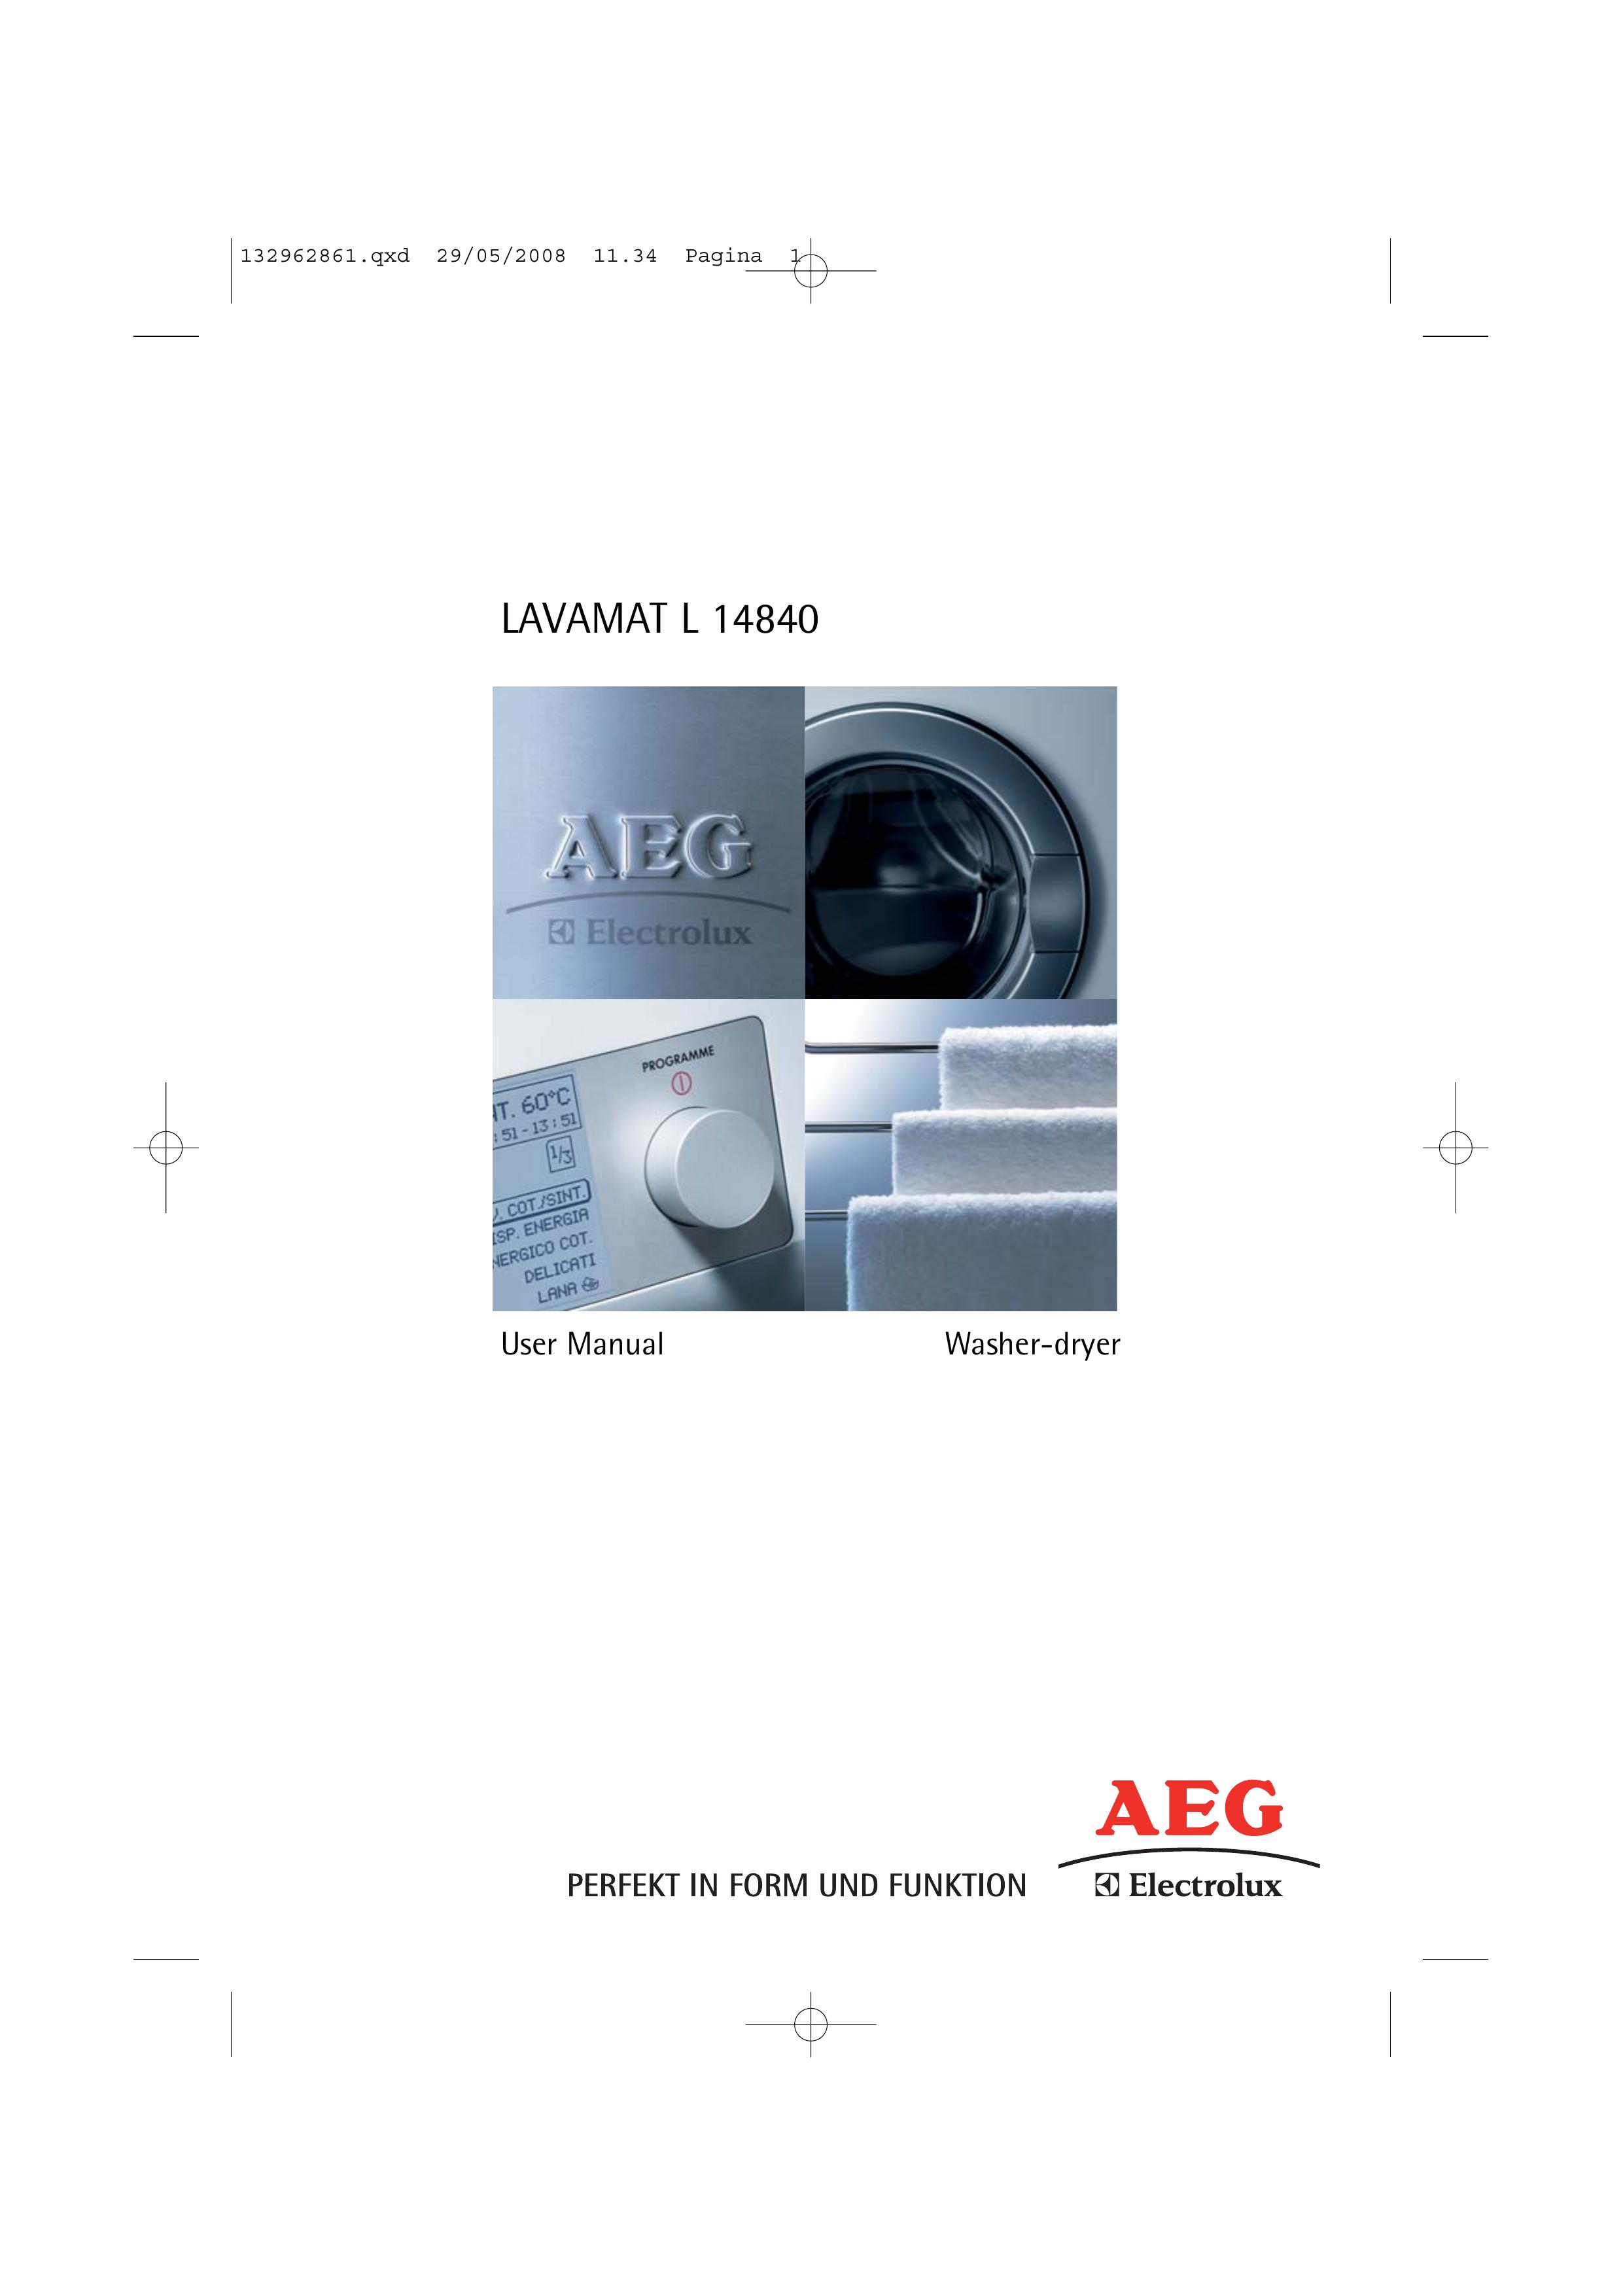 AEG L 14840 Washer/Dryer User Manual (Page 1)